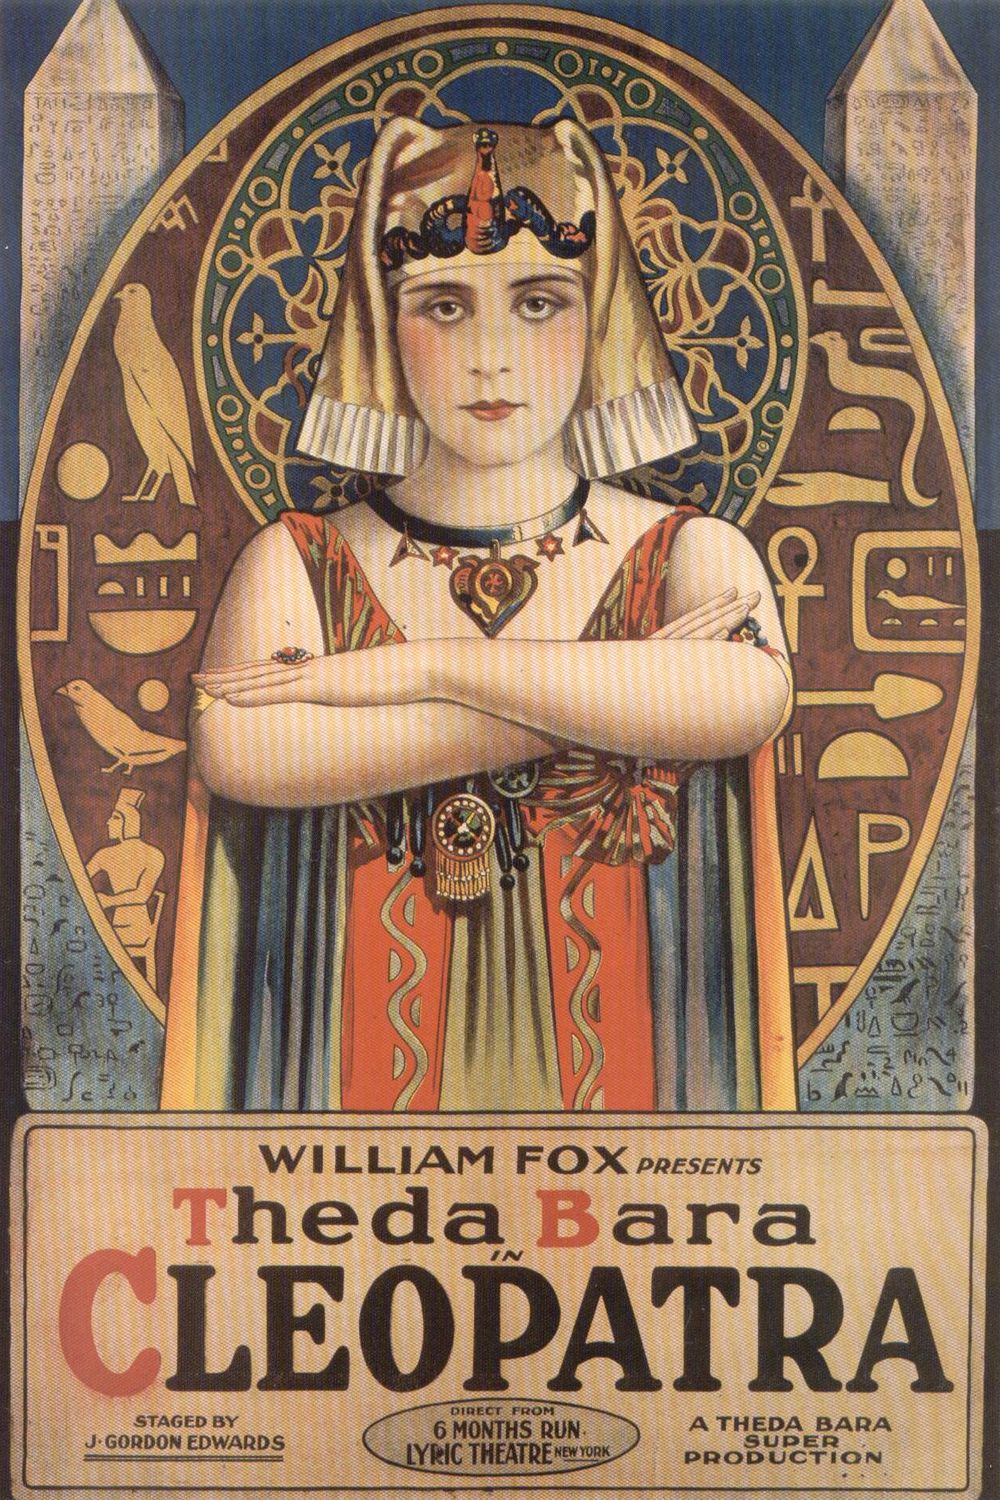 Extra Large Movie Poster Image for Cleopatra 